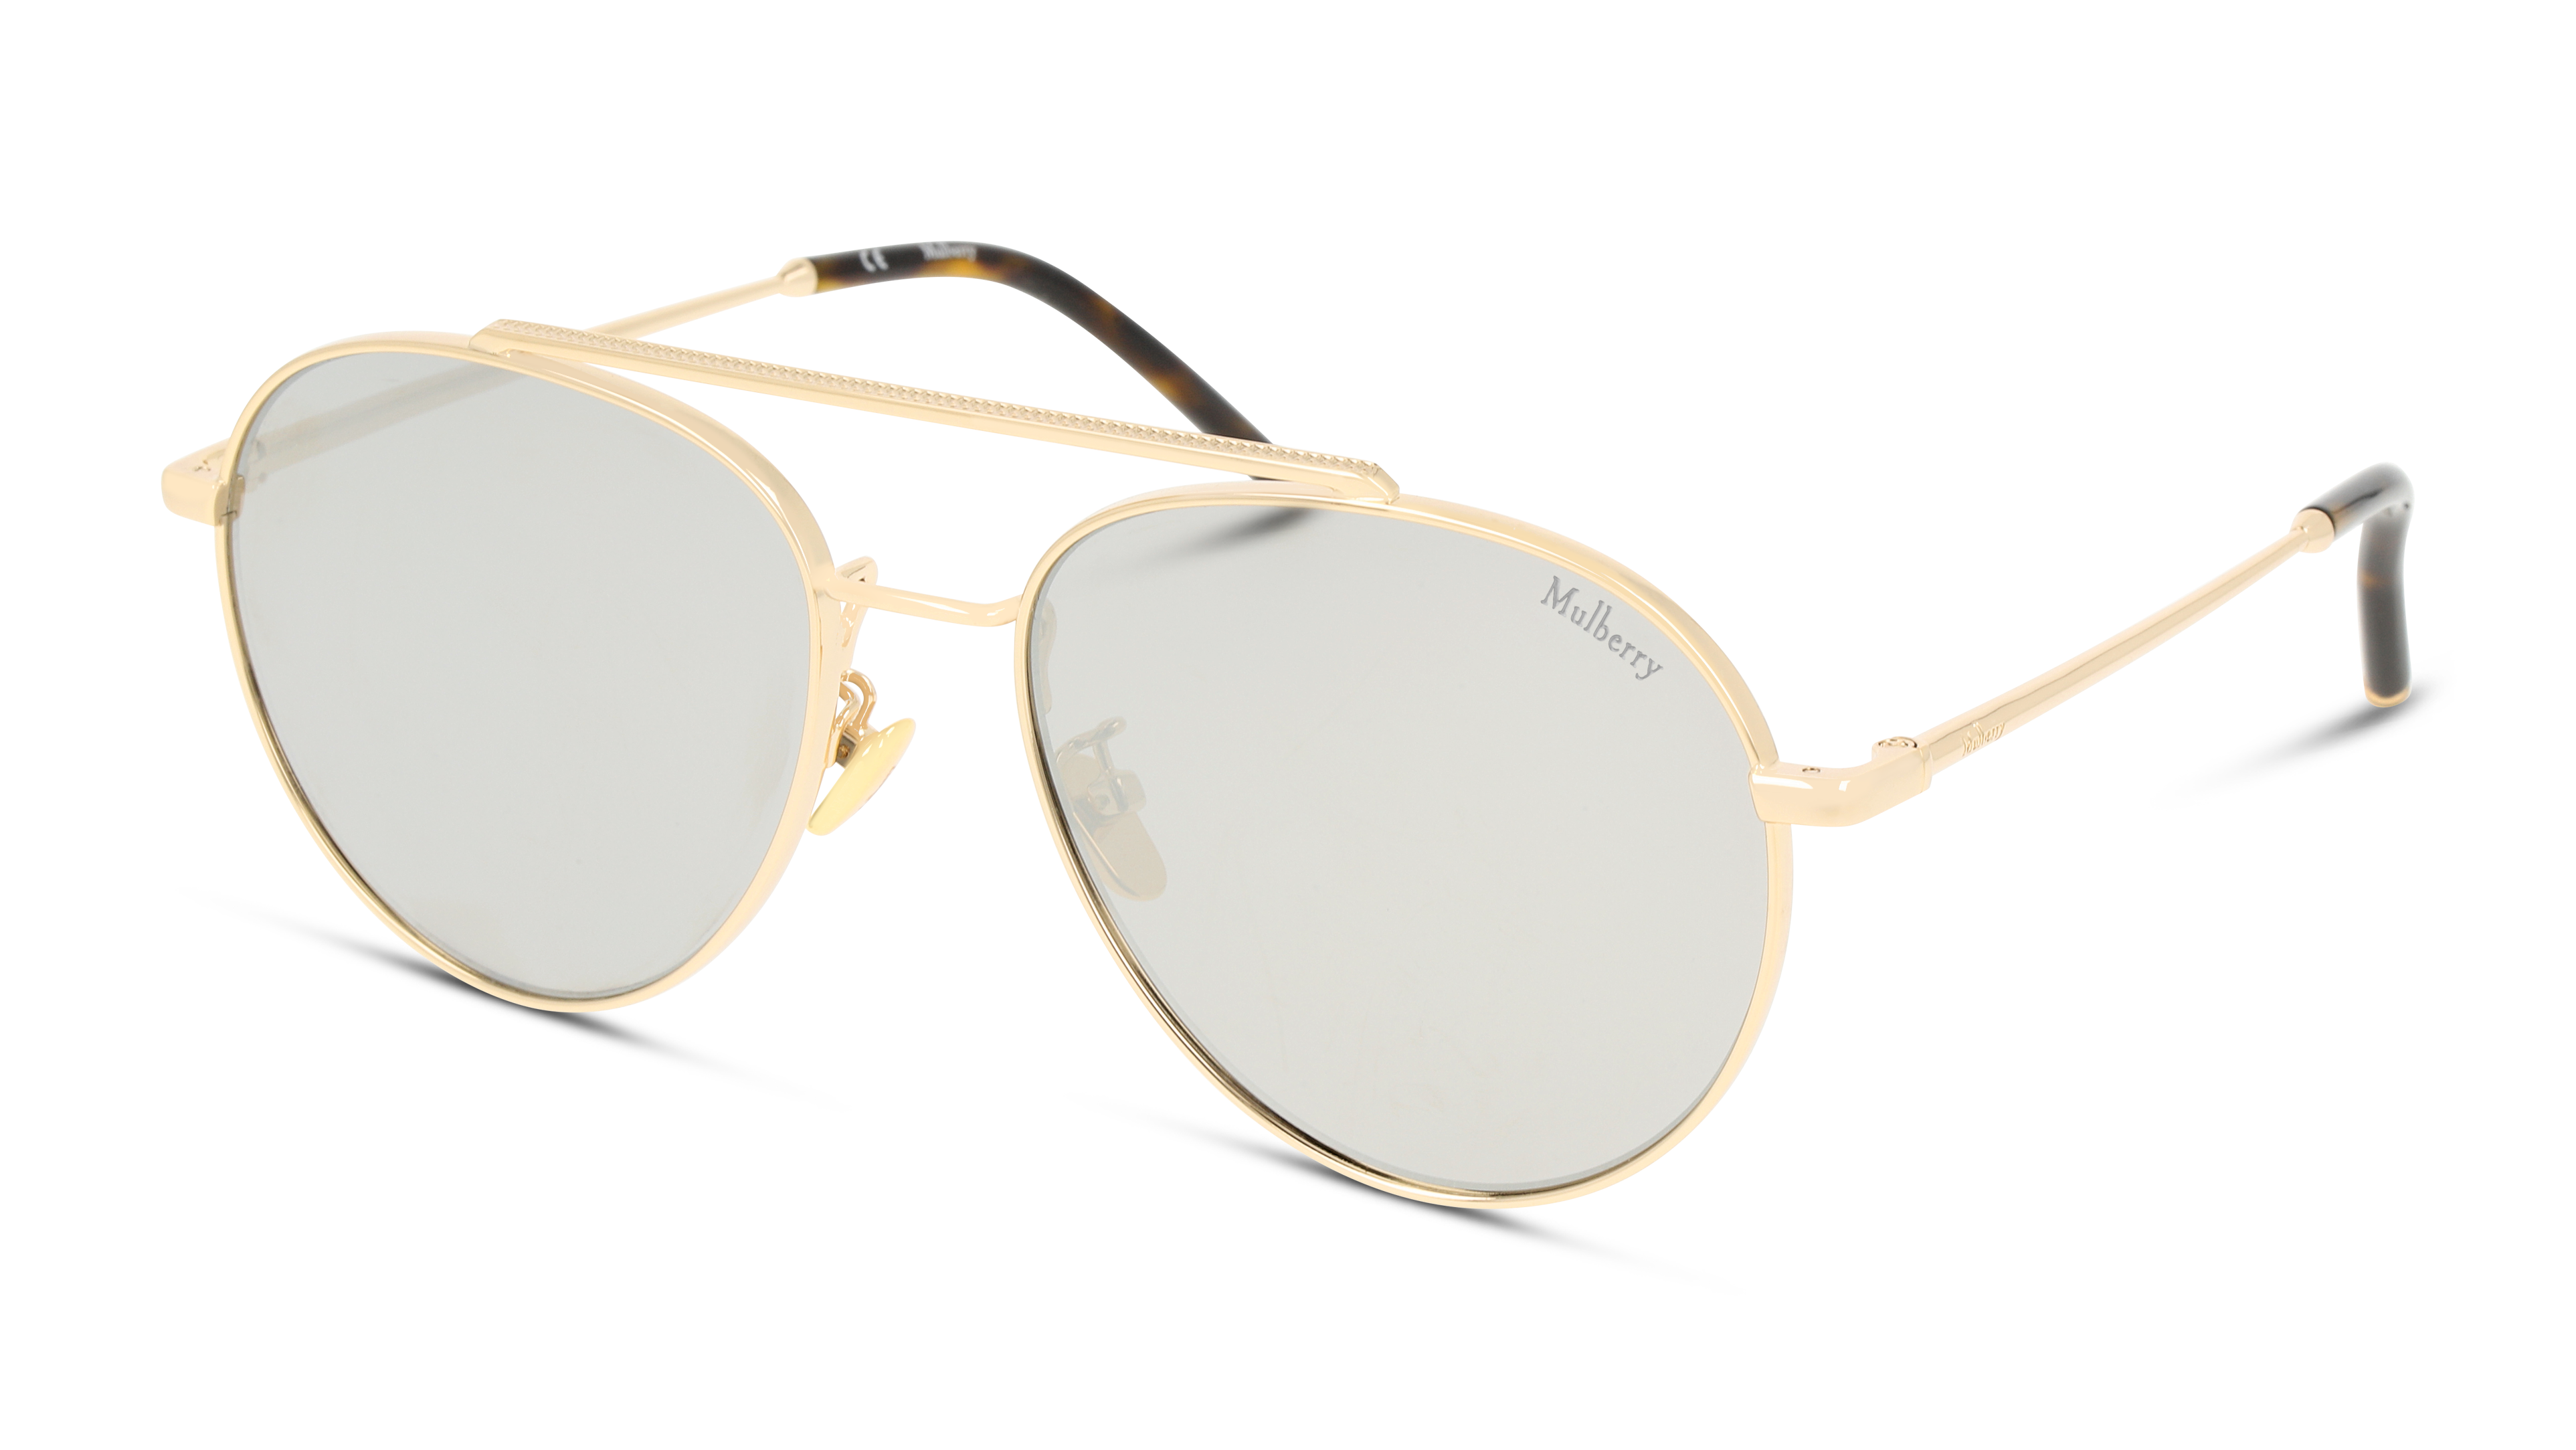 Angle_Left01 Mulberry SML 009 Sunglasses Grey / Gold